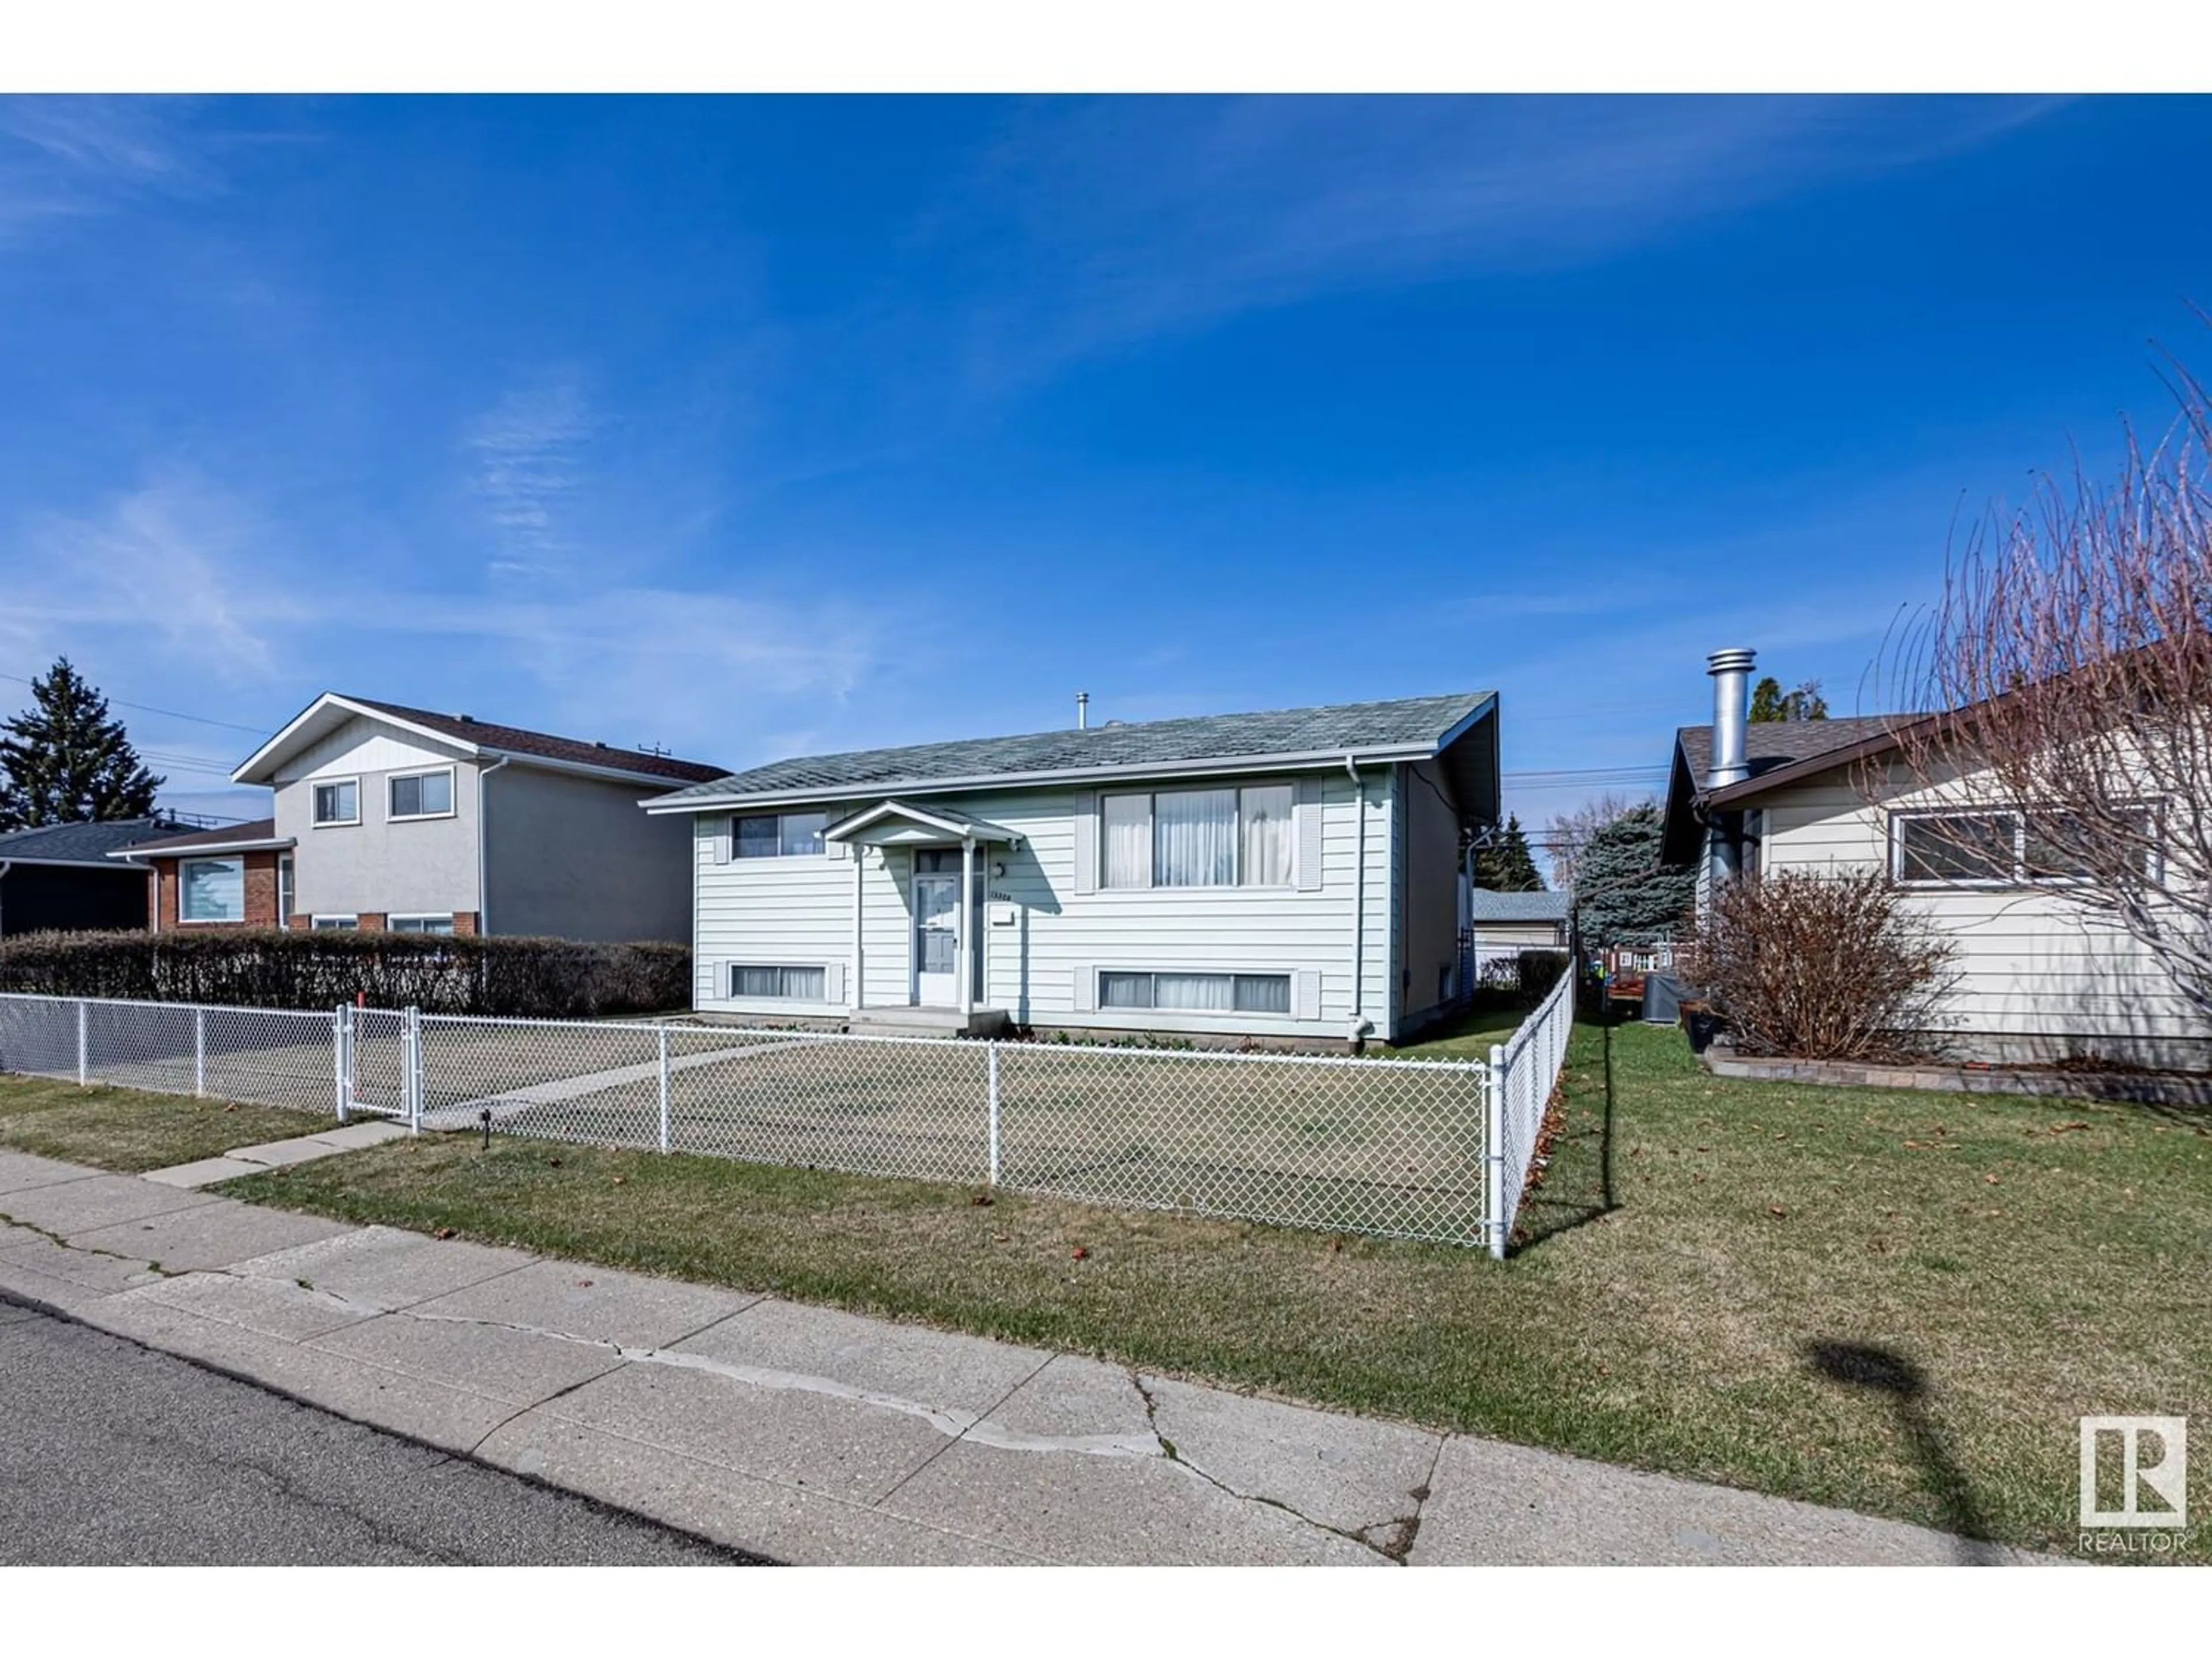 Frontside or backside of a home for 13320 72 ST NW, Edmonton Alberta T5C0R2